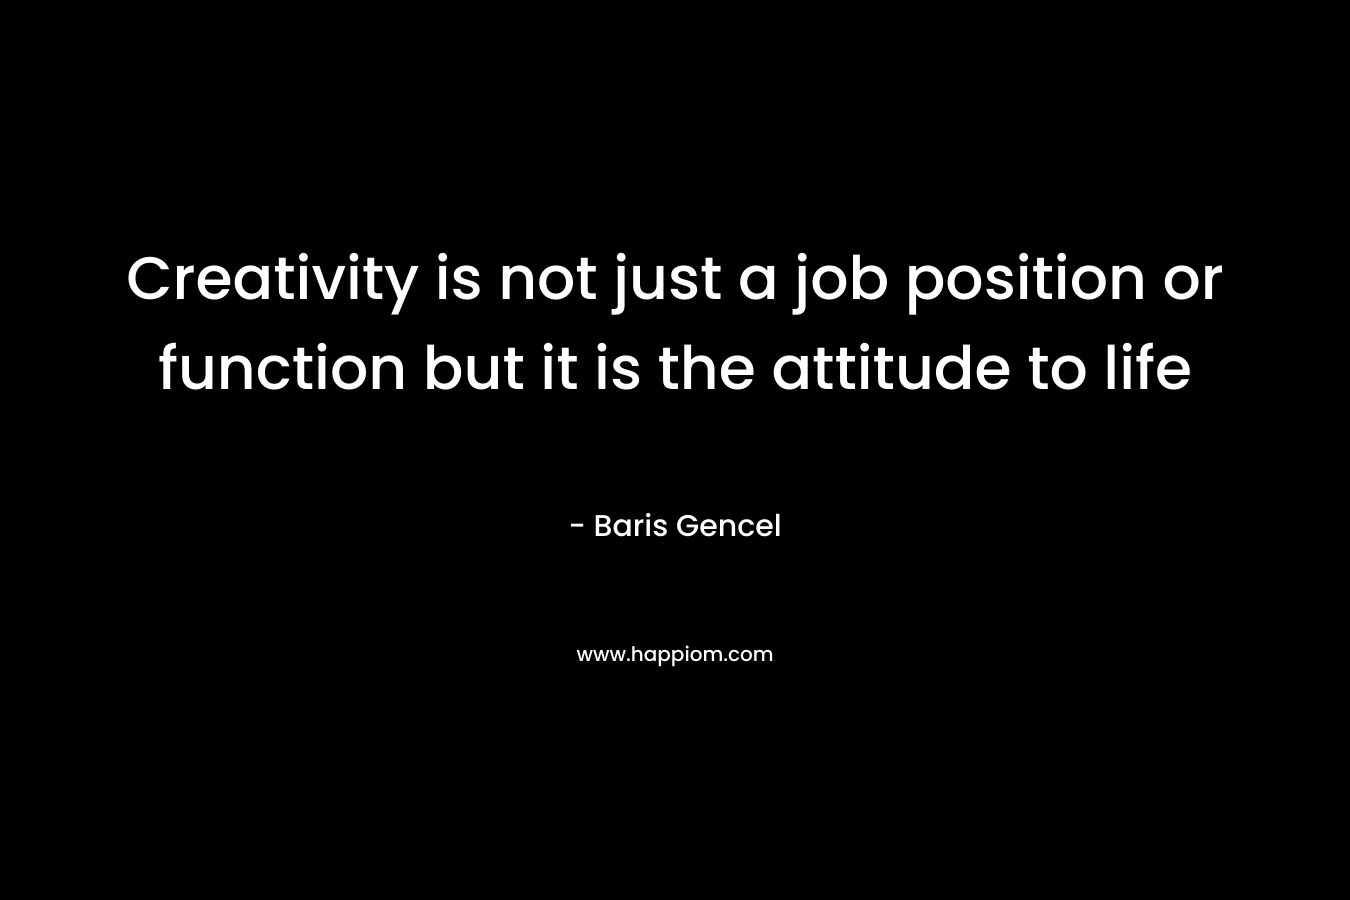 Creativity is not just a job position or function but it is the attitude to life